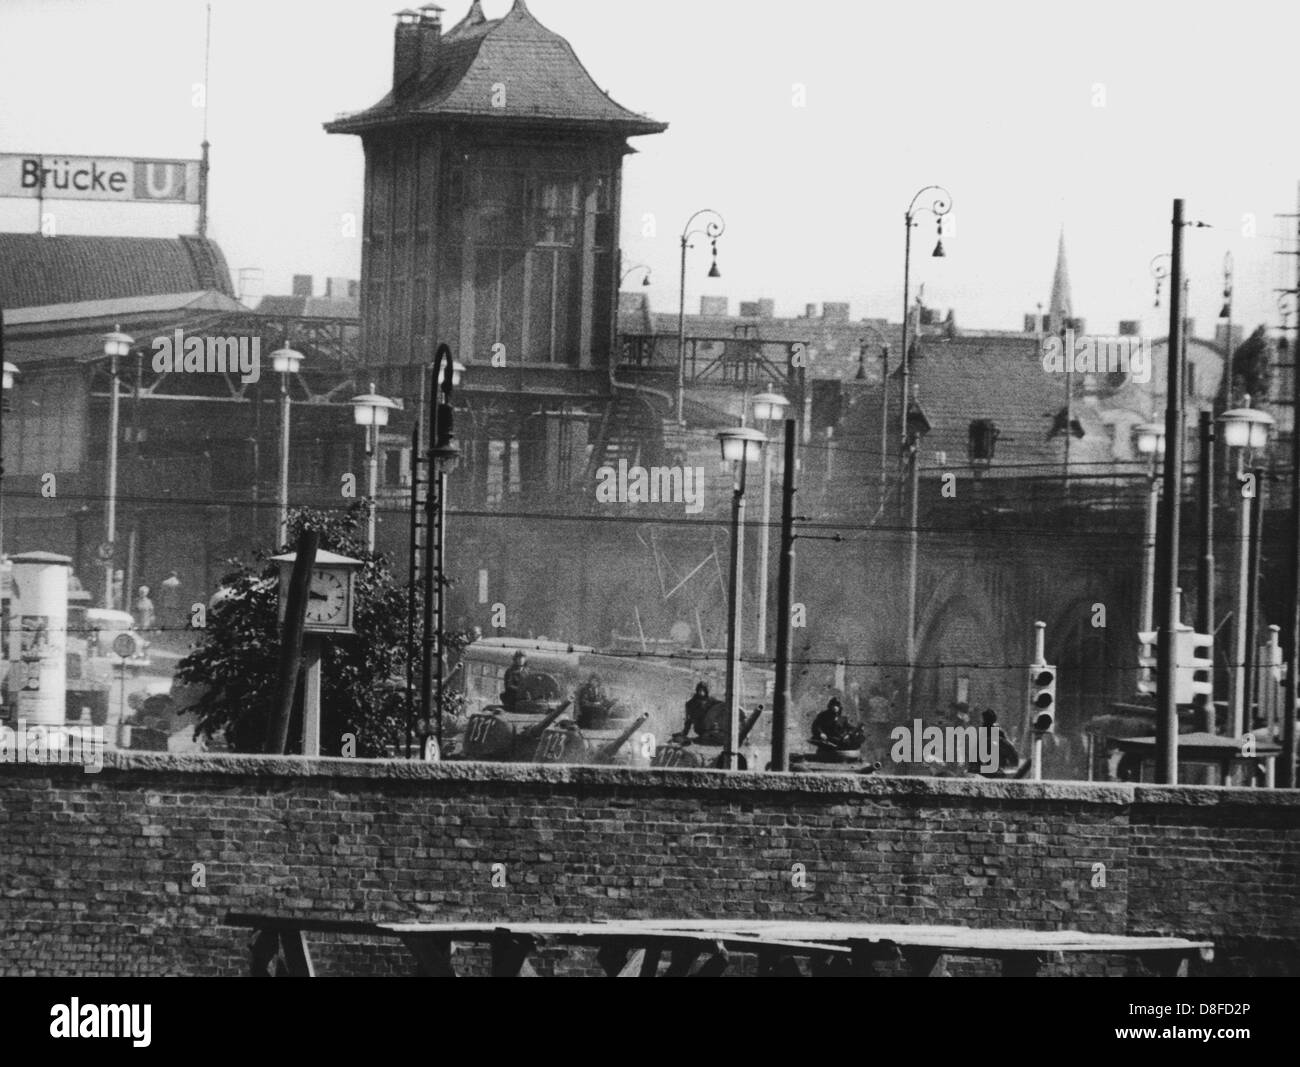 Soviet tanks aiming on West Berlin pictured at Warsaw Bridge in East Berlin, GDR, 13 August 1961. Soviet authorities had barred forcibly the Berlin borders. Stock Photo